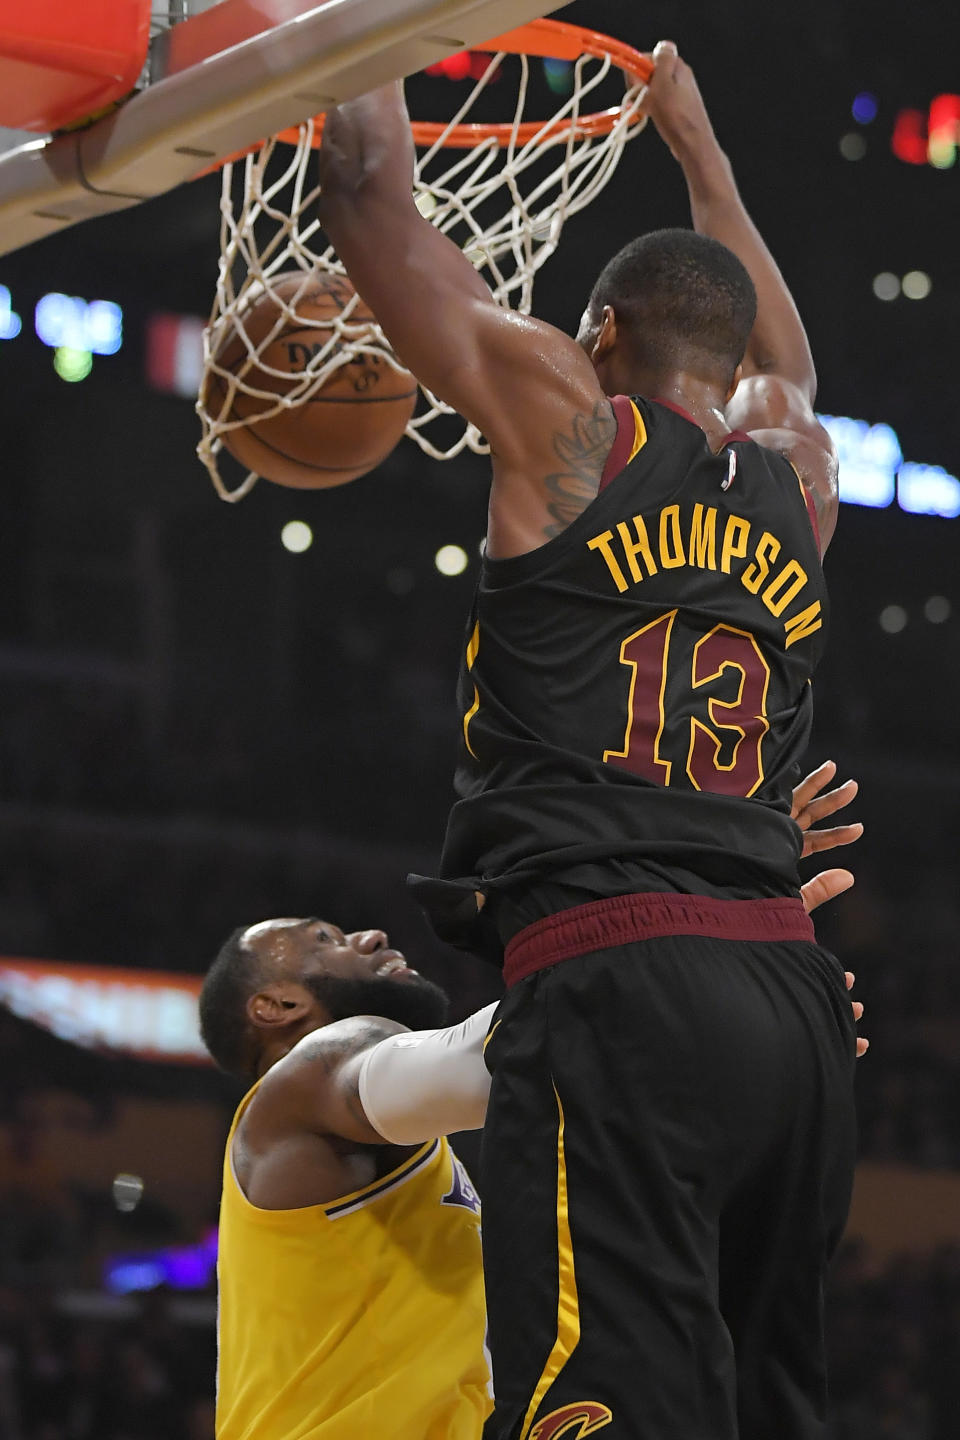 Cleveland Cavaliers center Tristan Thompson, right, dunks over Los Angeles Lakers forward LeBron James during the first half of an NBA basketball game Monday, Jan. 13, 2020, in Los Angeles. (AP Photo/Mark J. Terrill)